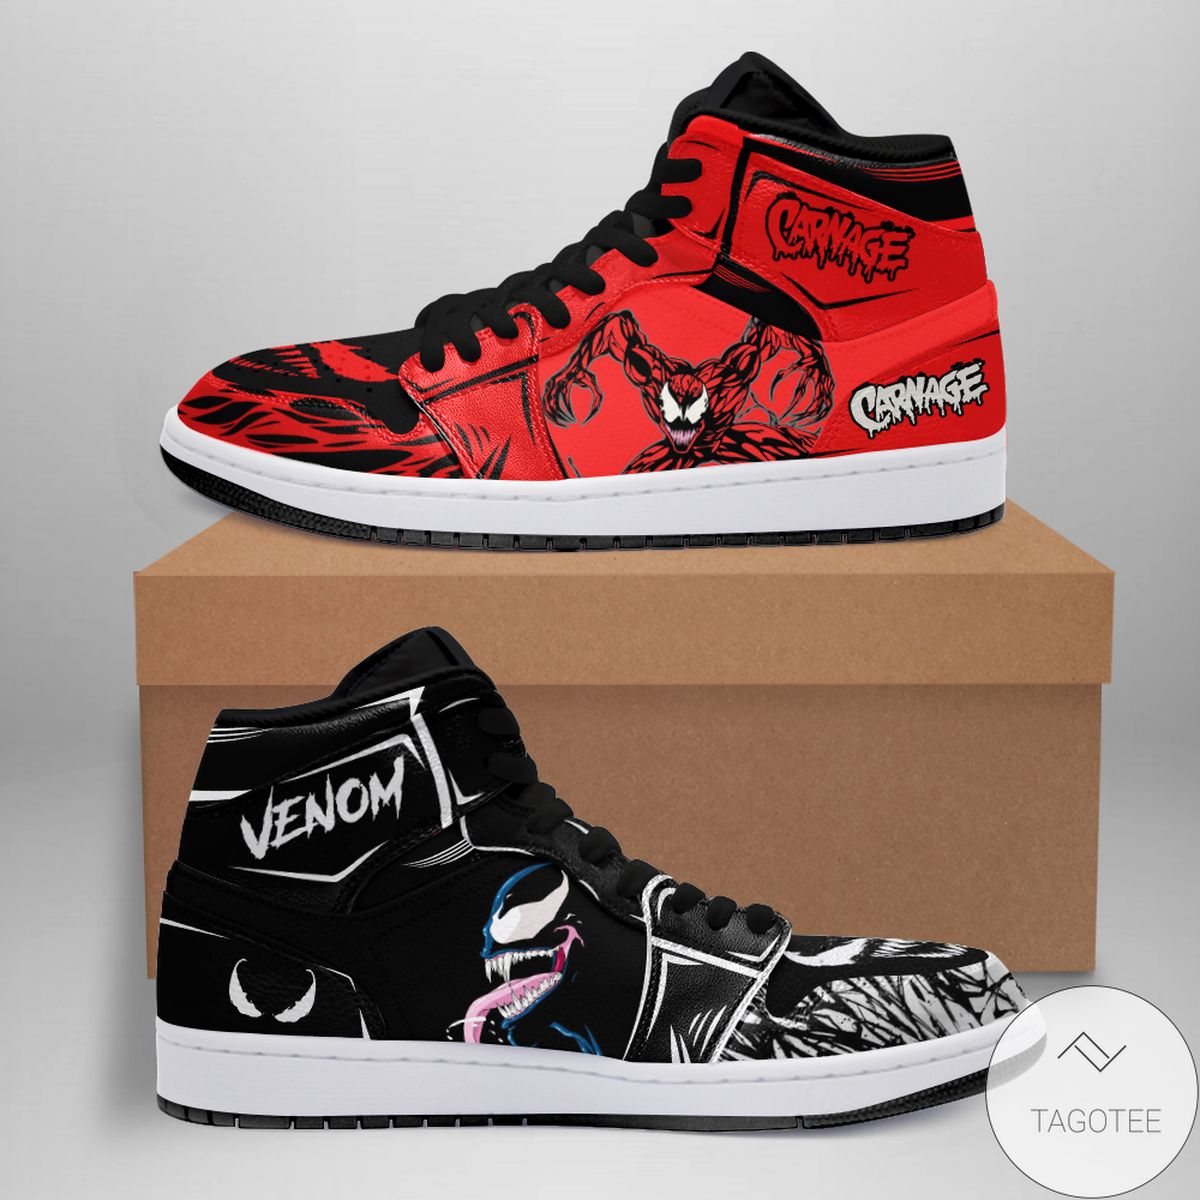 Venom Let There Be Carnage Air Jordan High Top Shoes